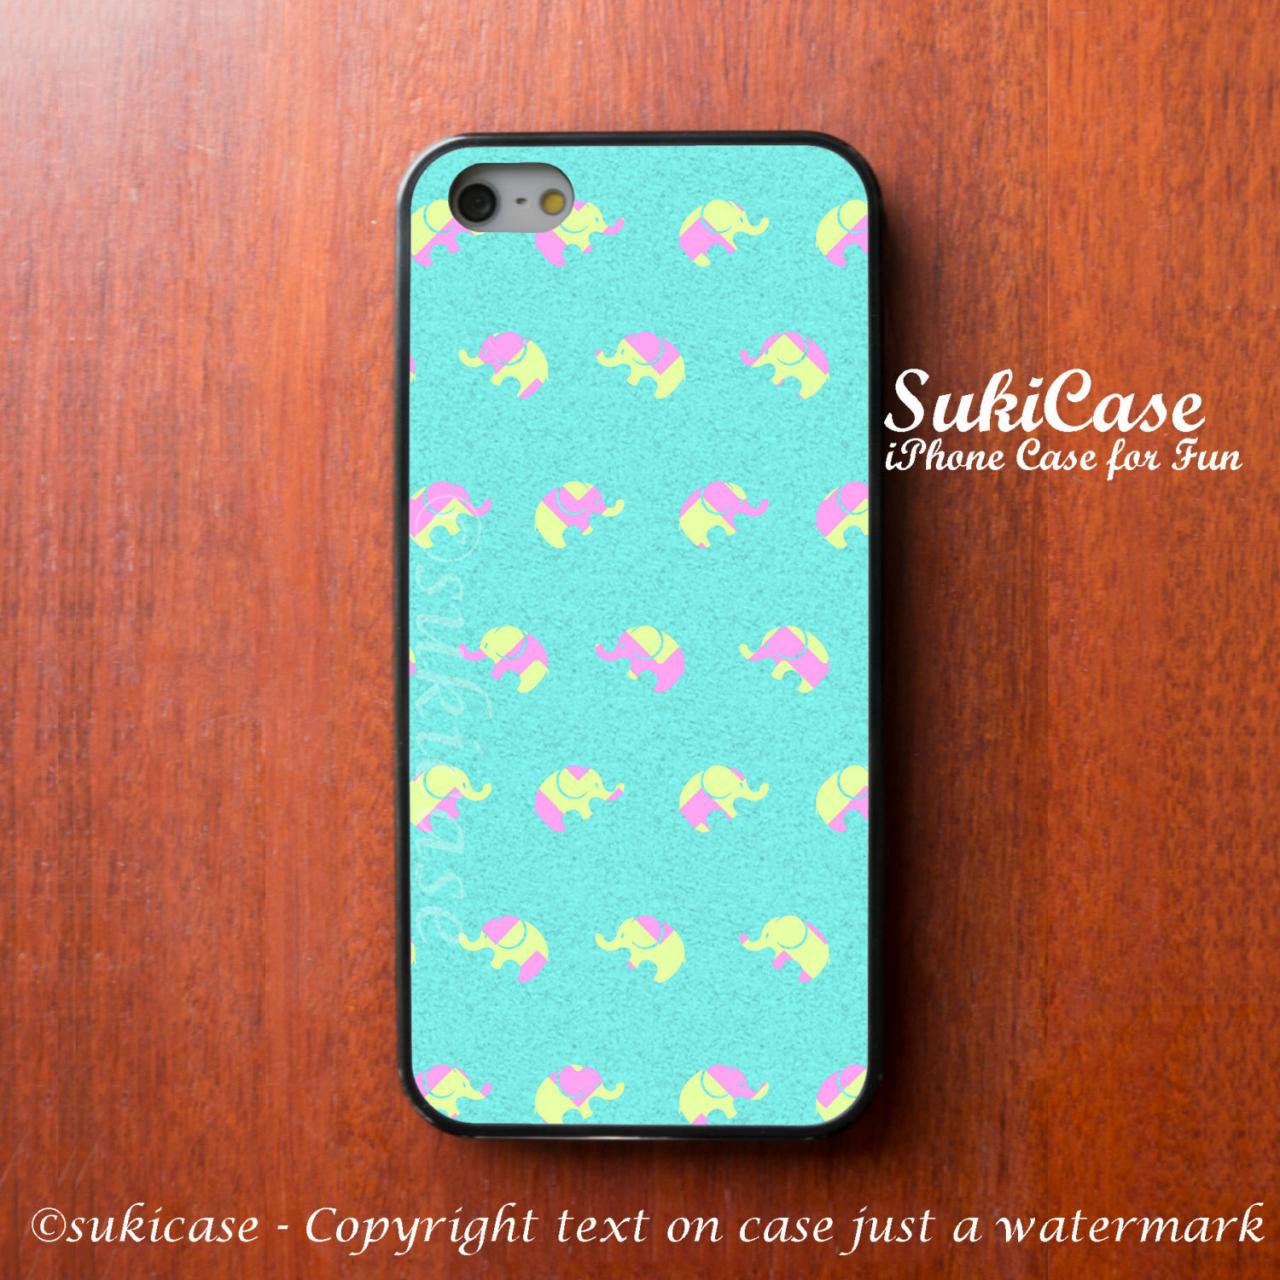 Iphone 5s Case Elephant Mint Tiny Patterns Yellow Pink Phone Case Iphone 5 Case Iphone 4 Case Samsung Galaxy S4 S3 Cover Iphone 5c Iphone 4s